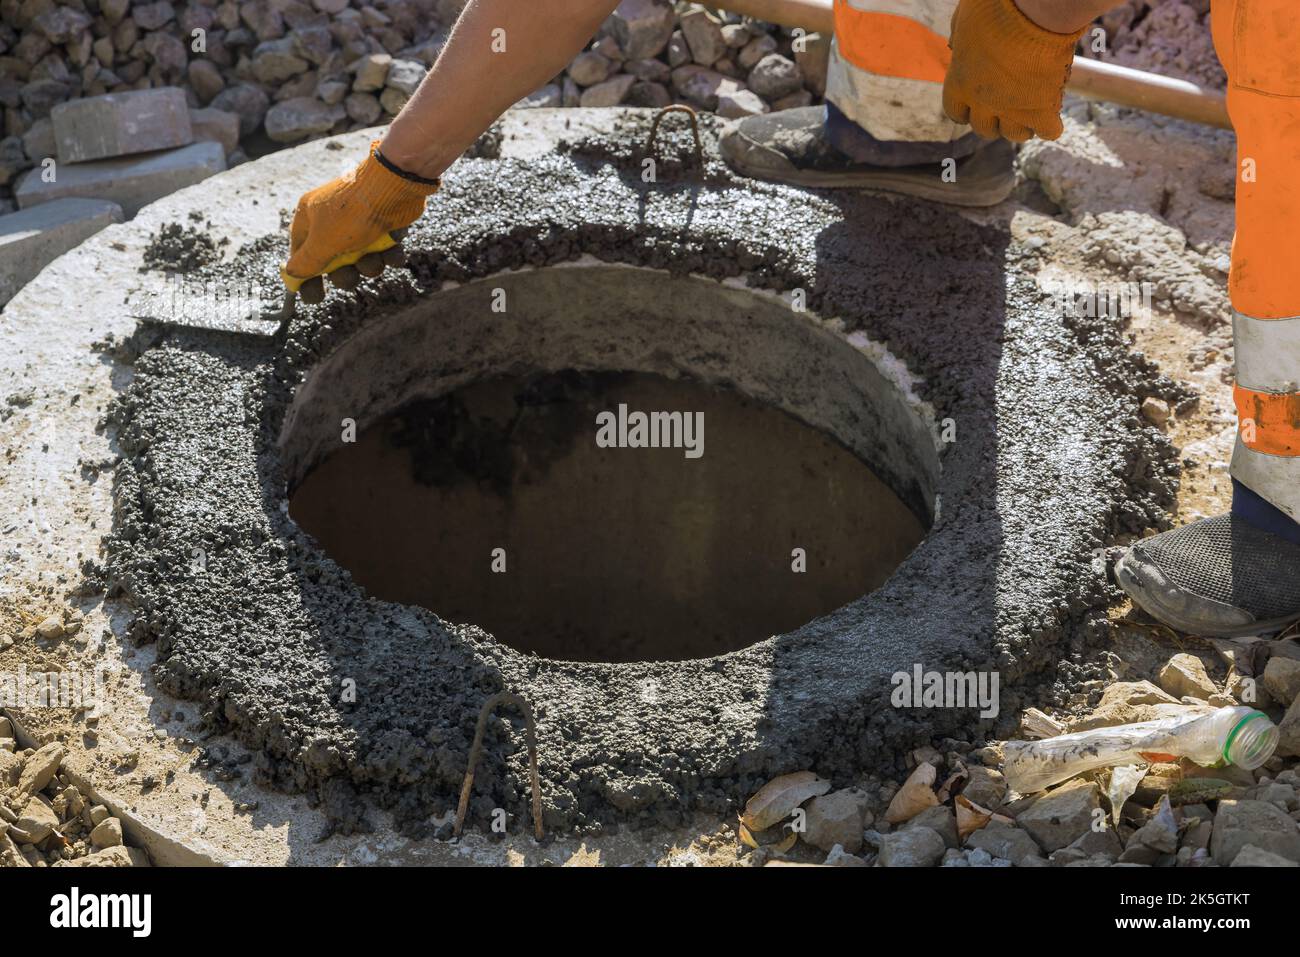 There is utility worker who is constructing pit for septic tank the sewerage manhole reconstructing sewage system Stock Photo